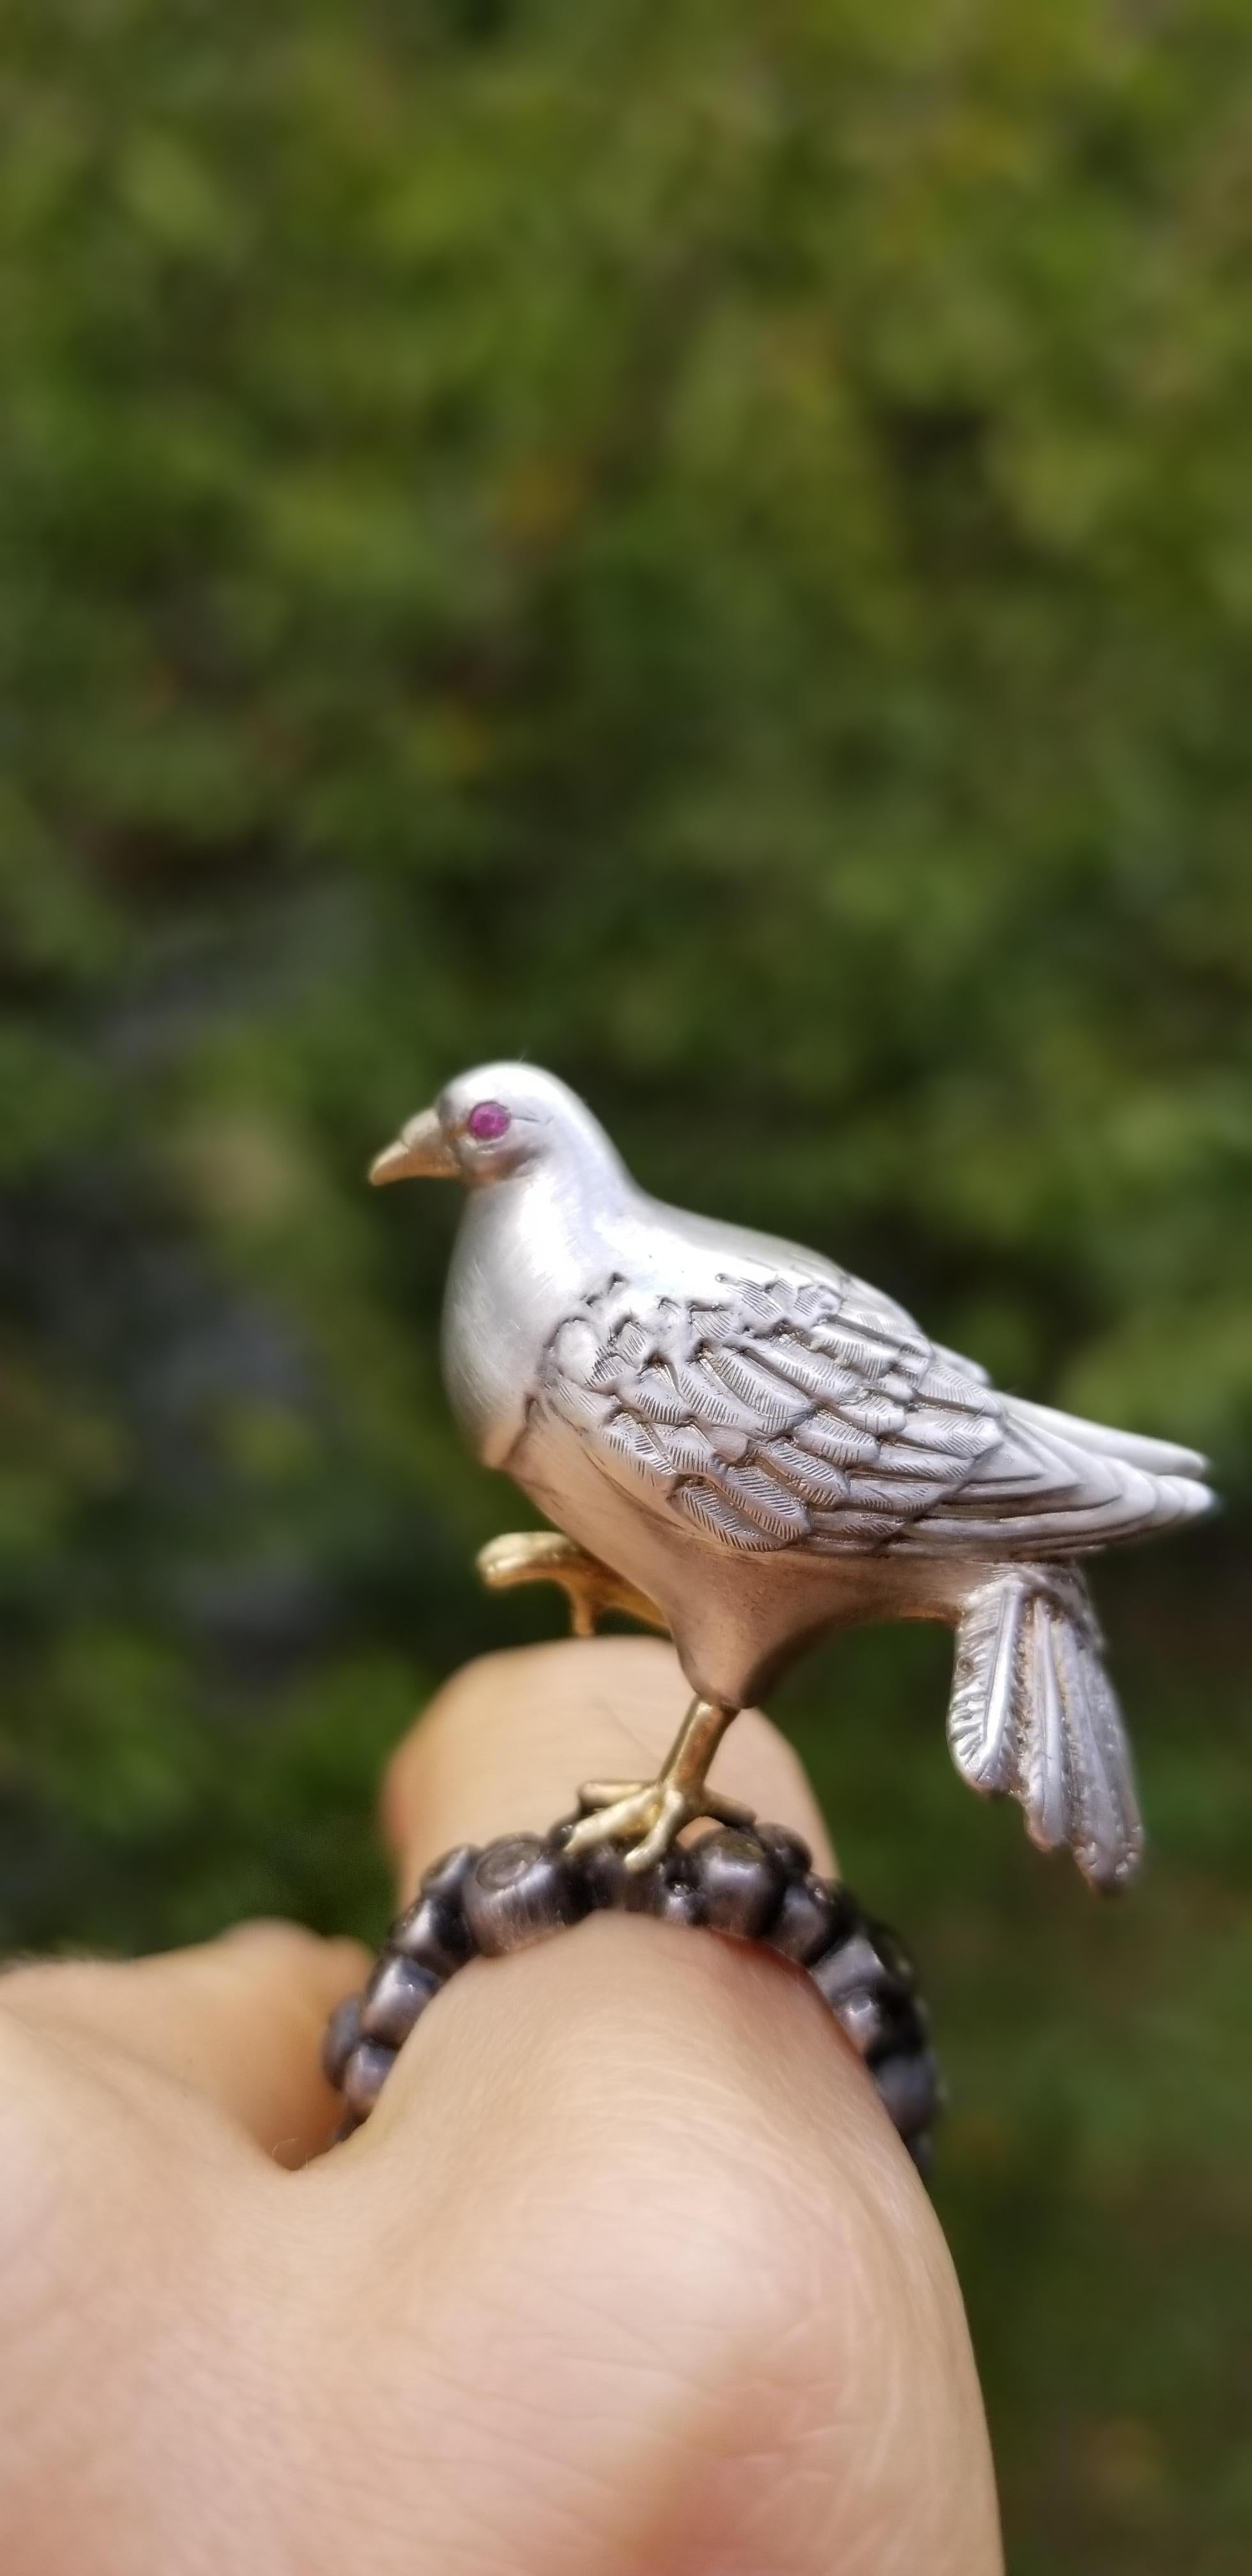 Galant Mr. Dove likes to strut his stuff. 
He parades for his partner atop a band of white diamonds set in oxidized Sterling silver round bezels, which form a band that comfortably encircles the wearer's finger.
He is a one-of-a-kind, originally